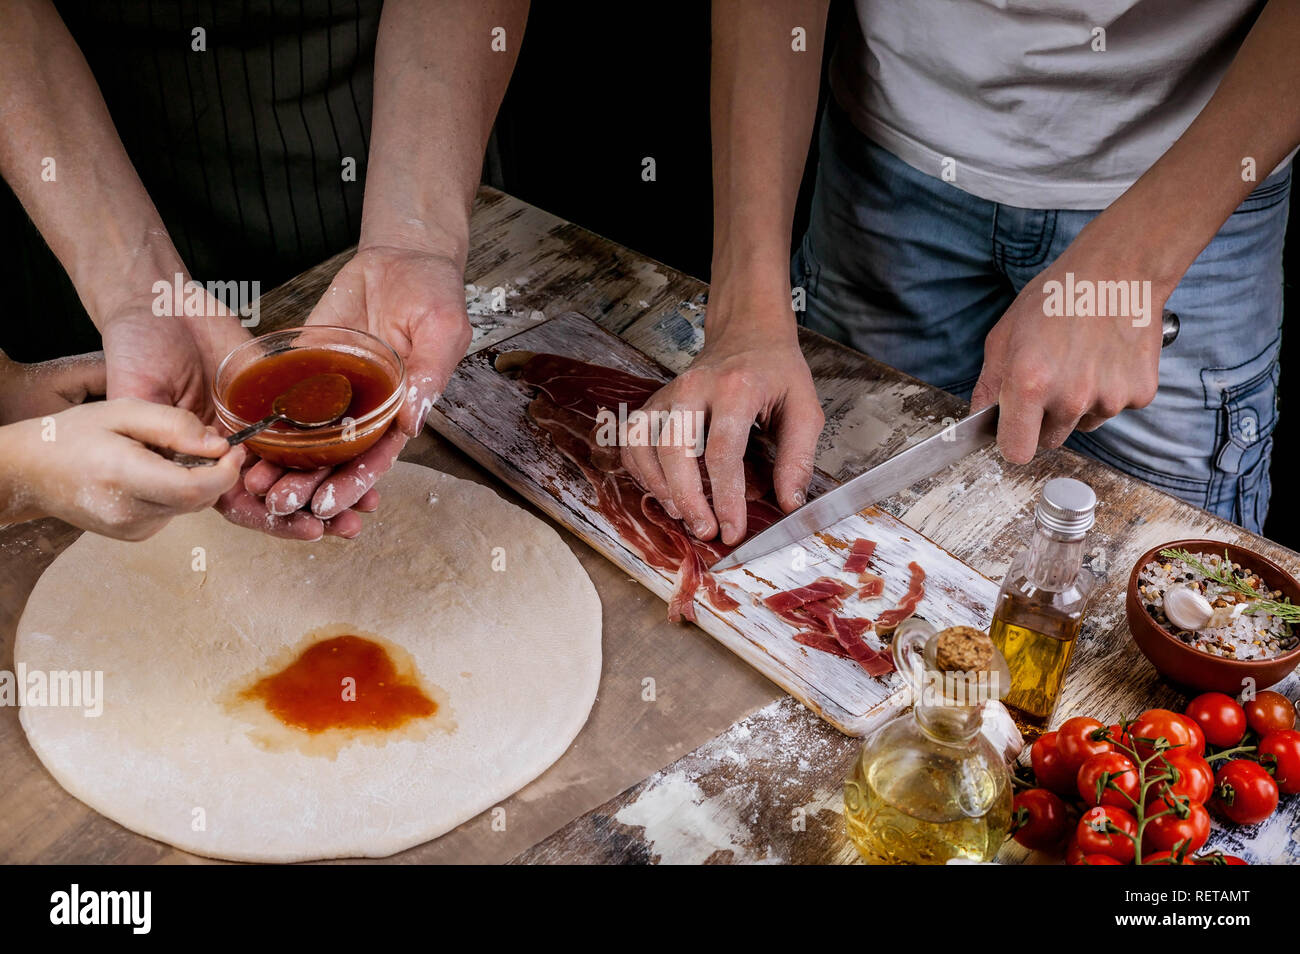 Women's and children's hand preparing homemade pizza together. Light toning Stock Photo